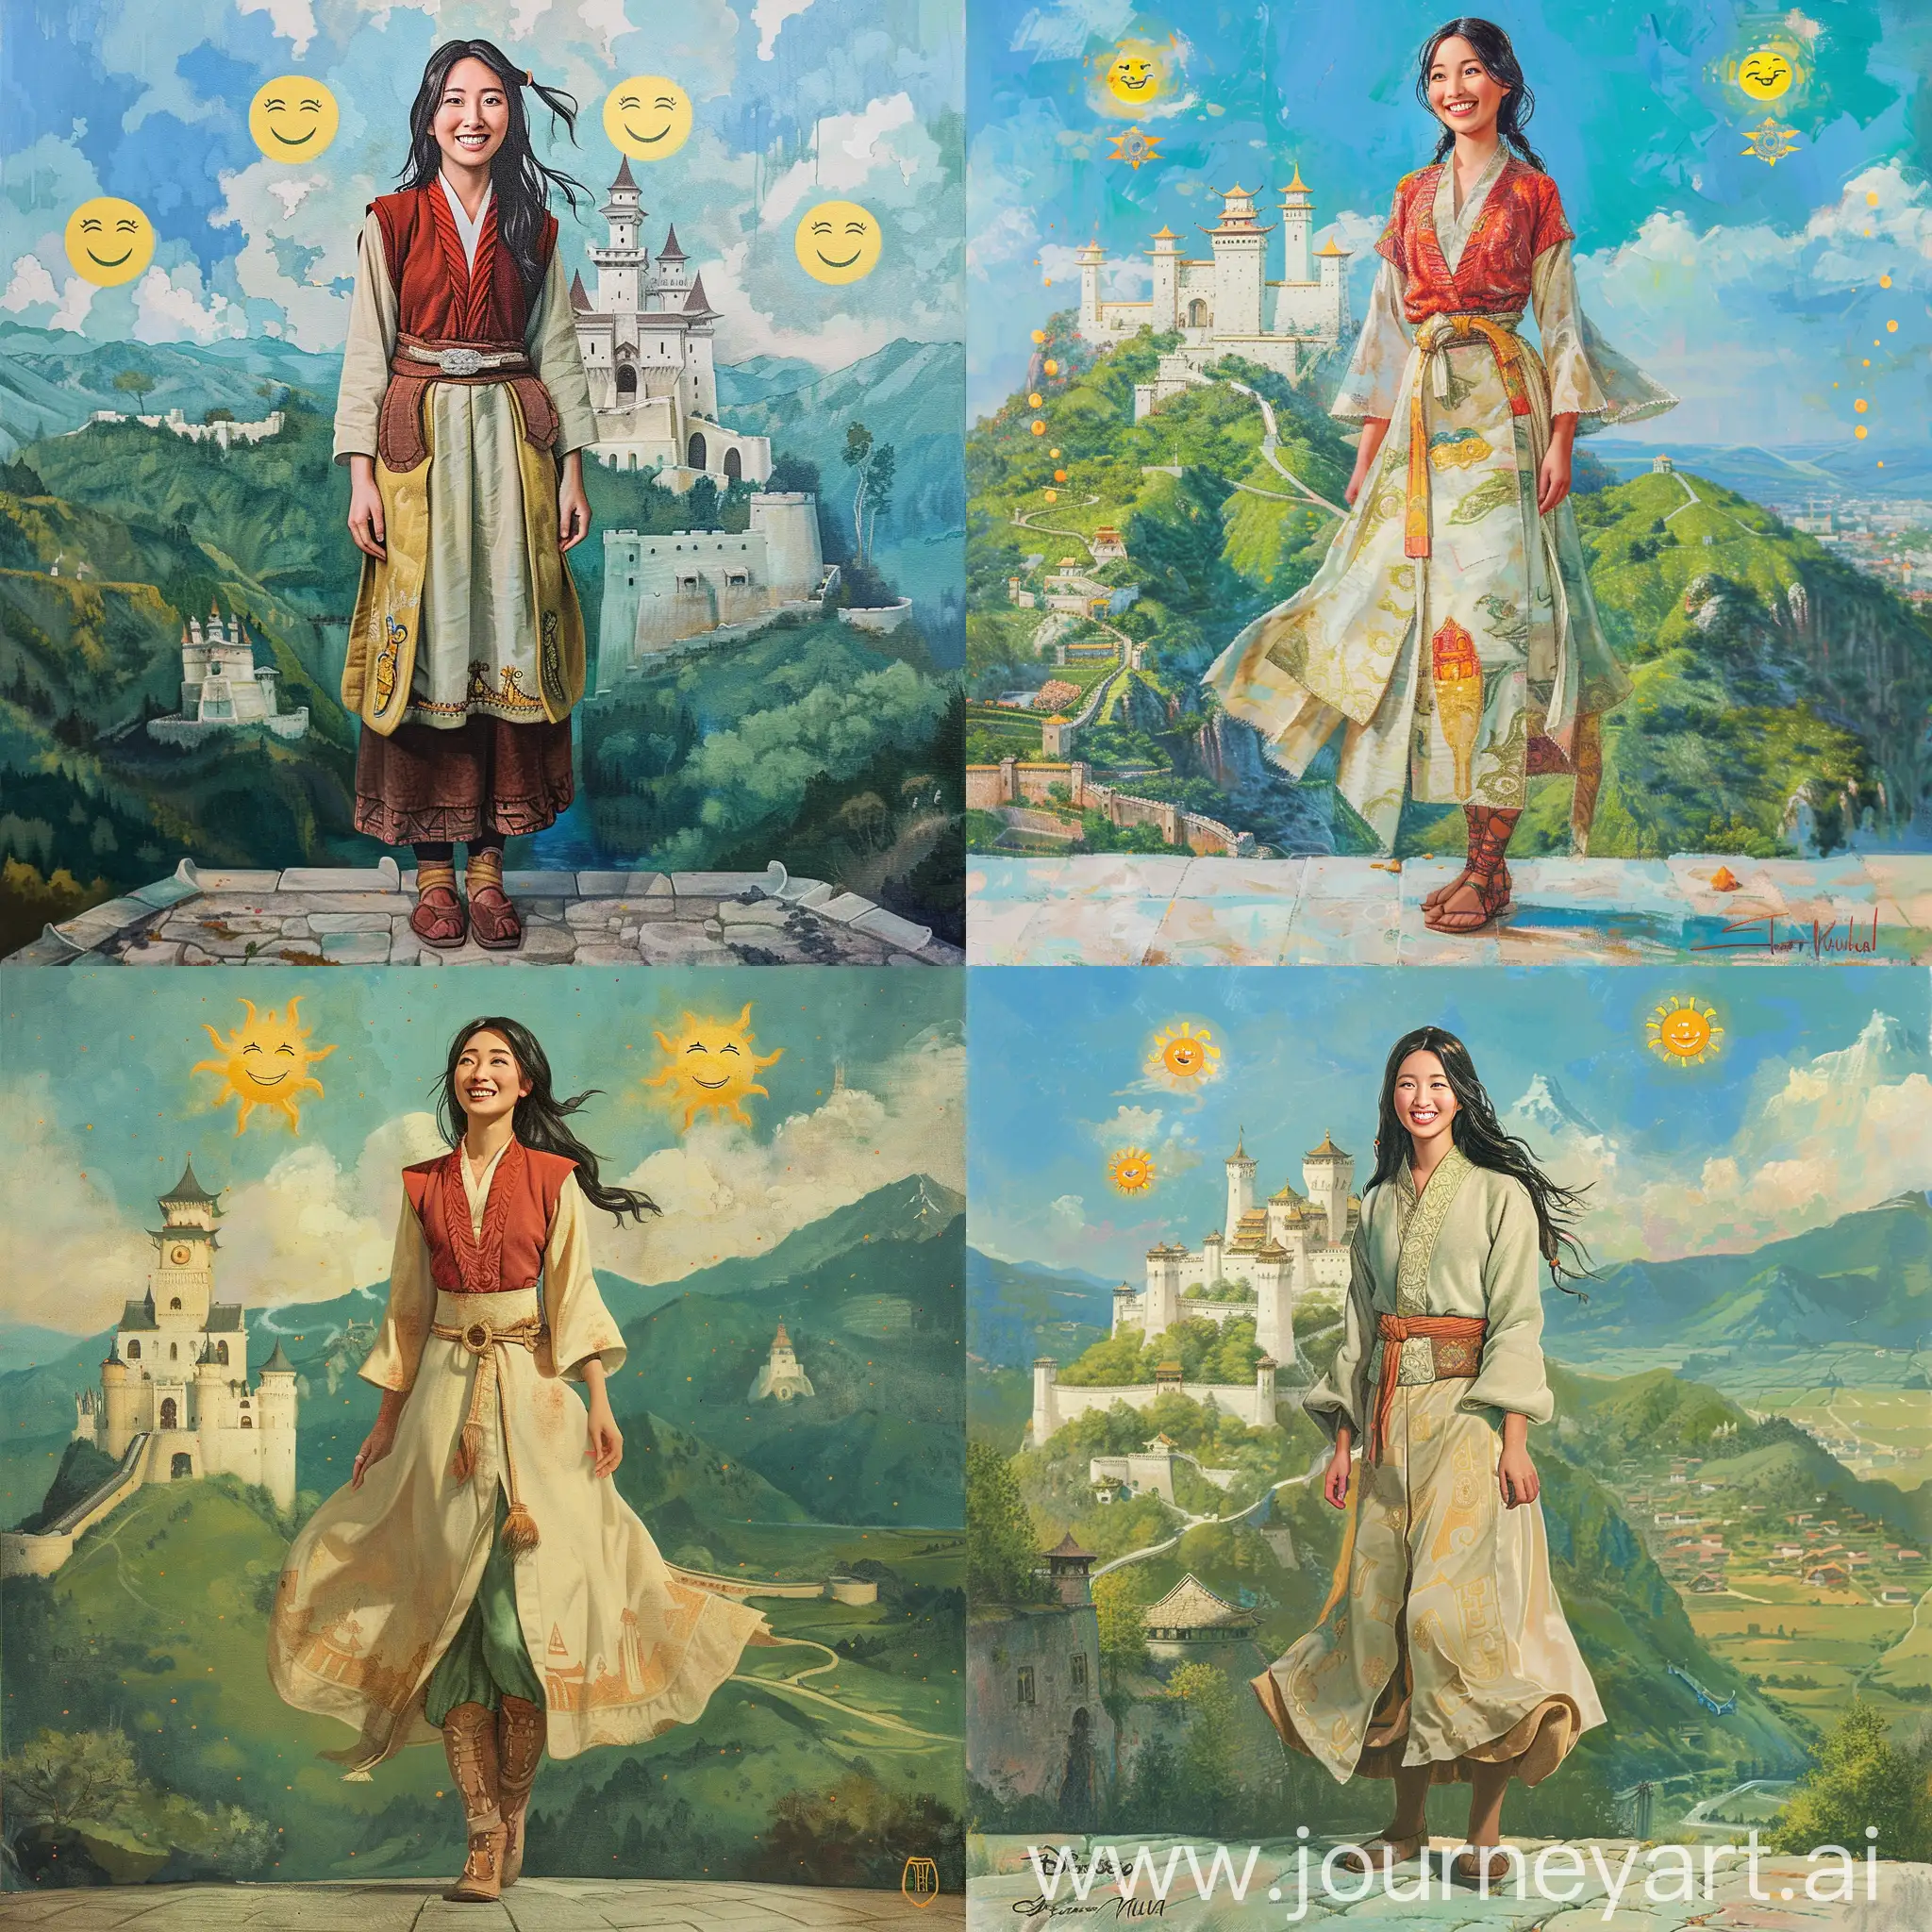 Historic painting style, character from Disney Movie Mulan :

a beautiful and charming Mulan, she wears her clothes and shoes,

full body to feet,

she is smiling and standing in the middle,

a white color medieval style Disney castle and European green mountain as background,

three small yellow smiling suns in the blue sky,